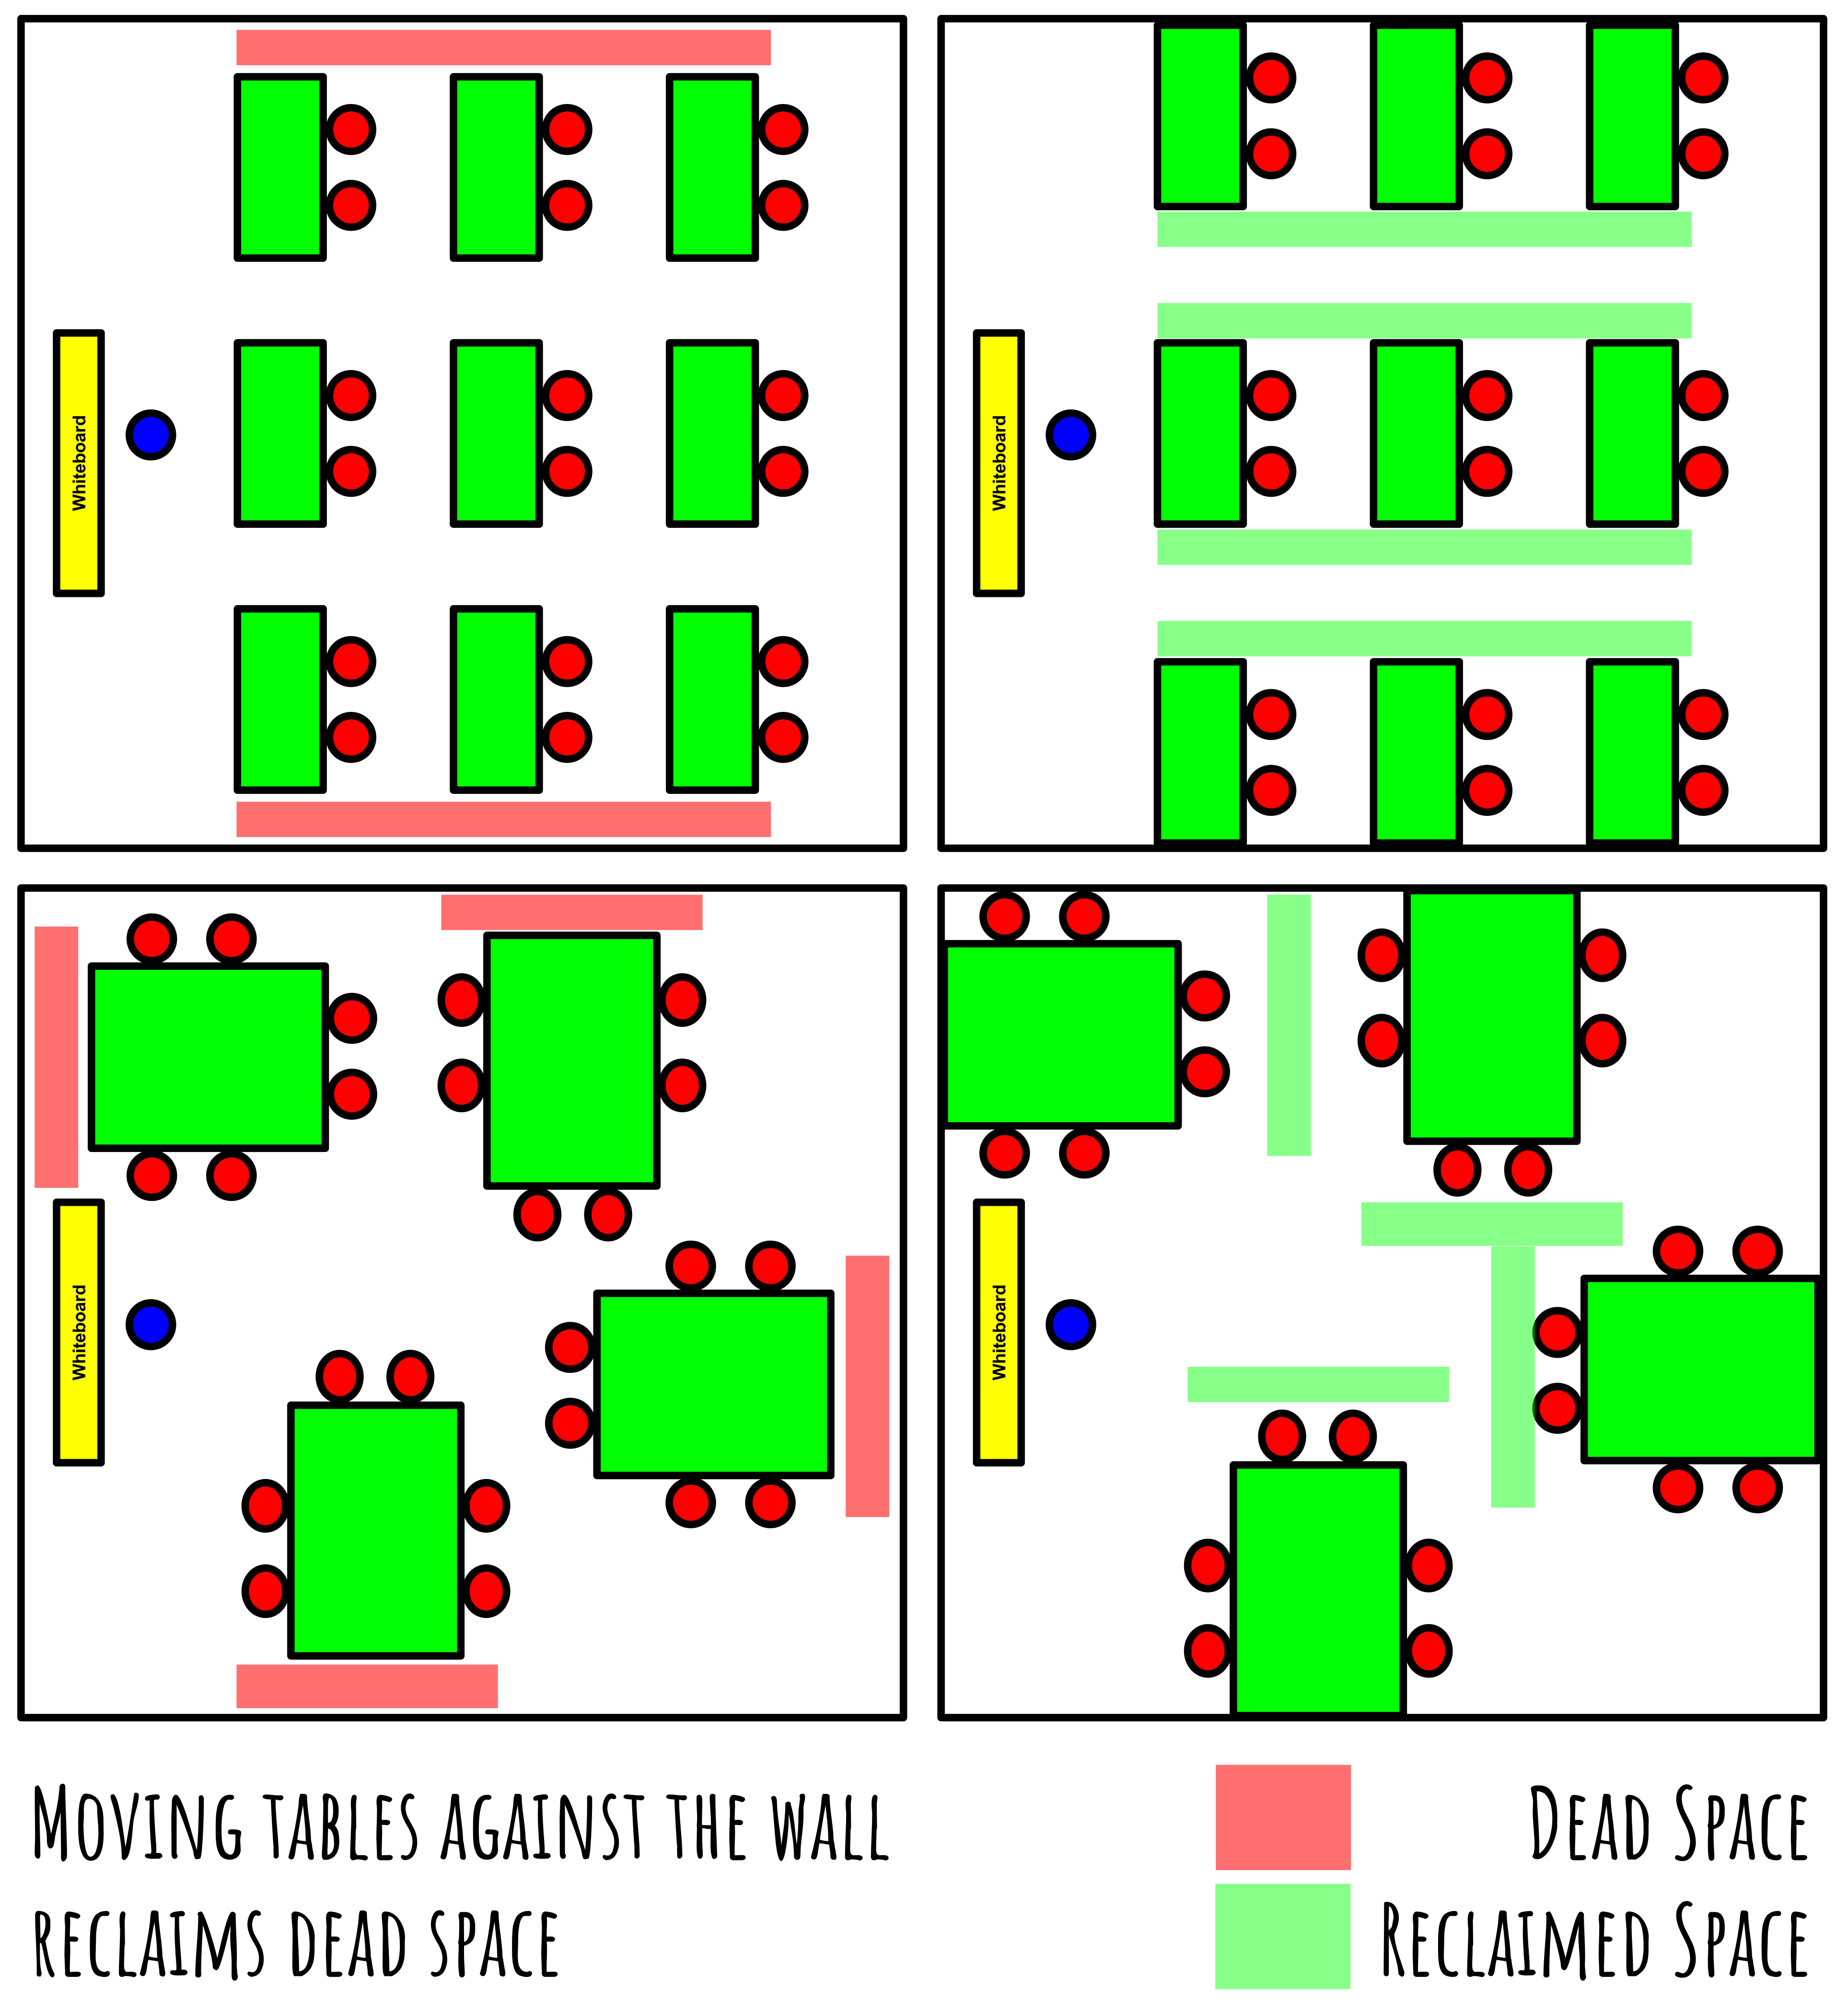 Classroom Layout - Table against wall to reduce dead space